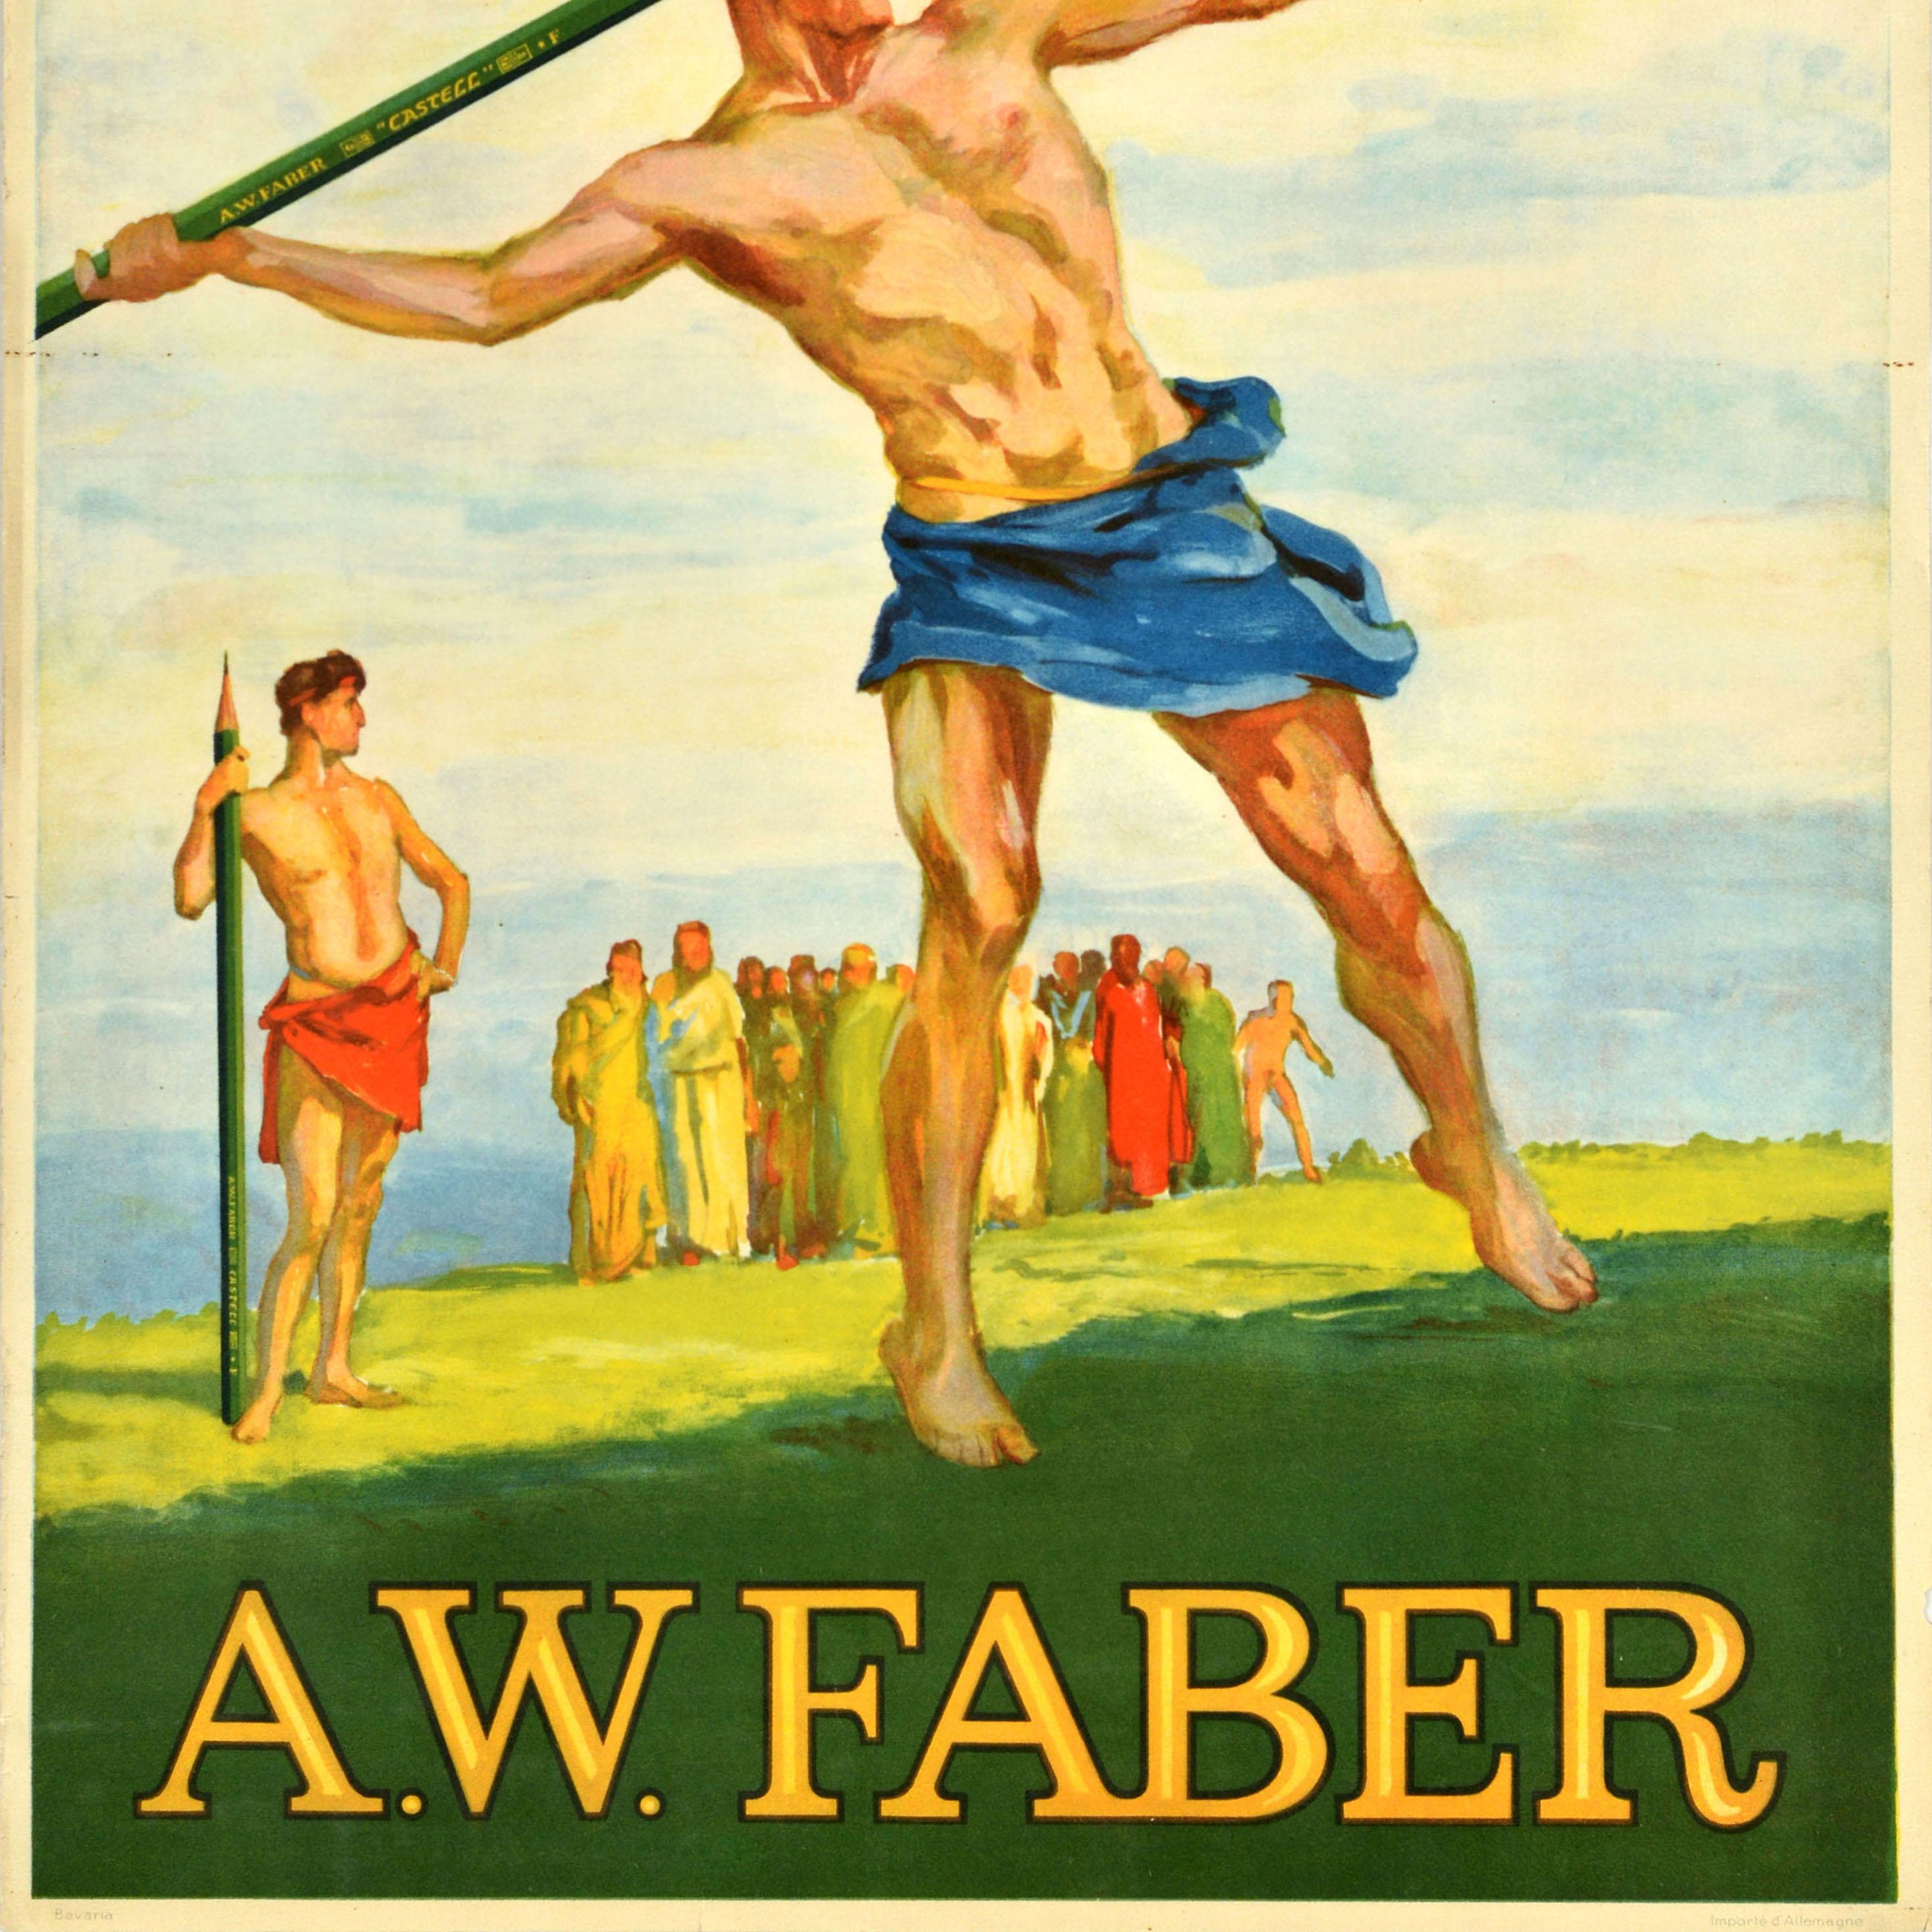 Original antique advertising poster for Castell A.W. Faber stationery supplies featuring a young athlete throwing a green AW Faber pencil as a javelin with another javelin thrower and spectators watching the background, all dressed in ancient toga